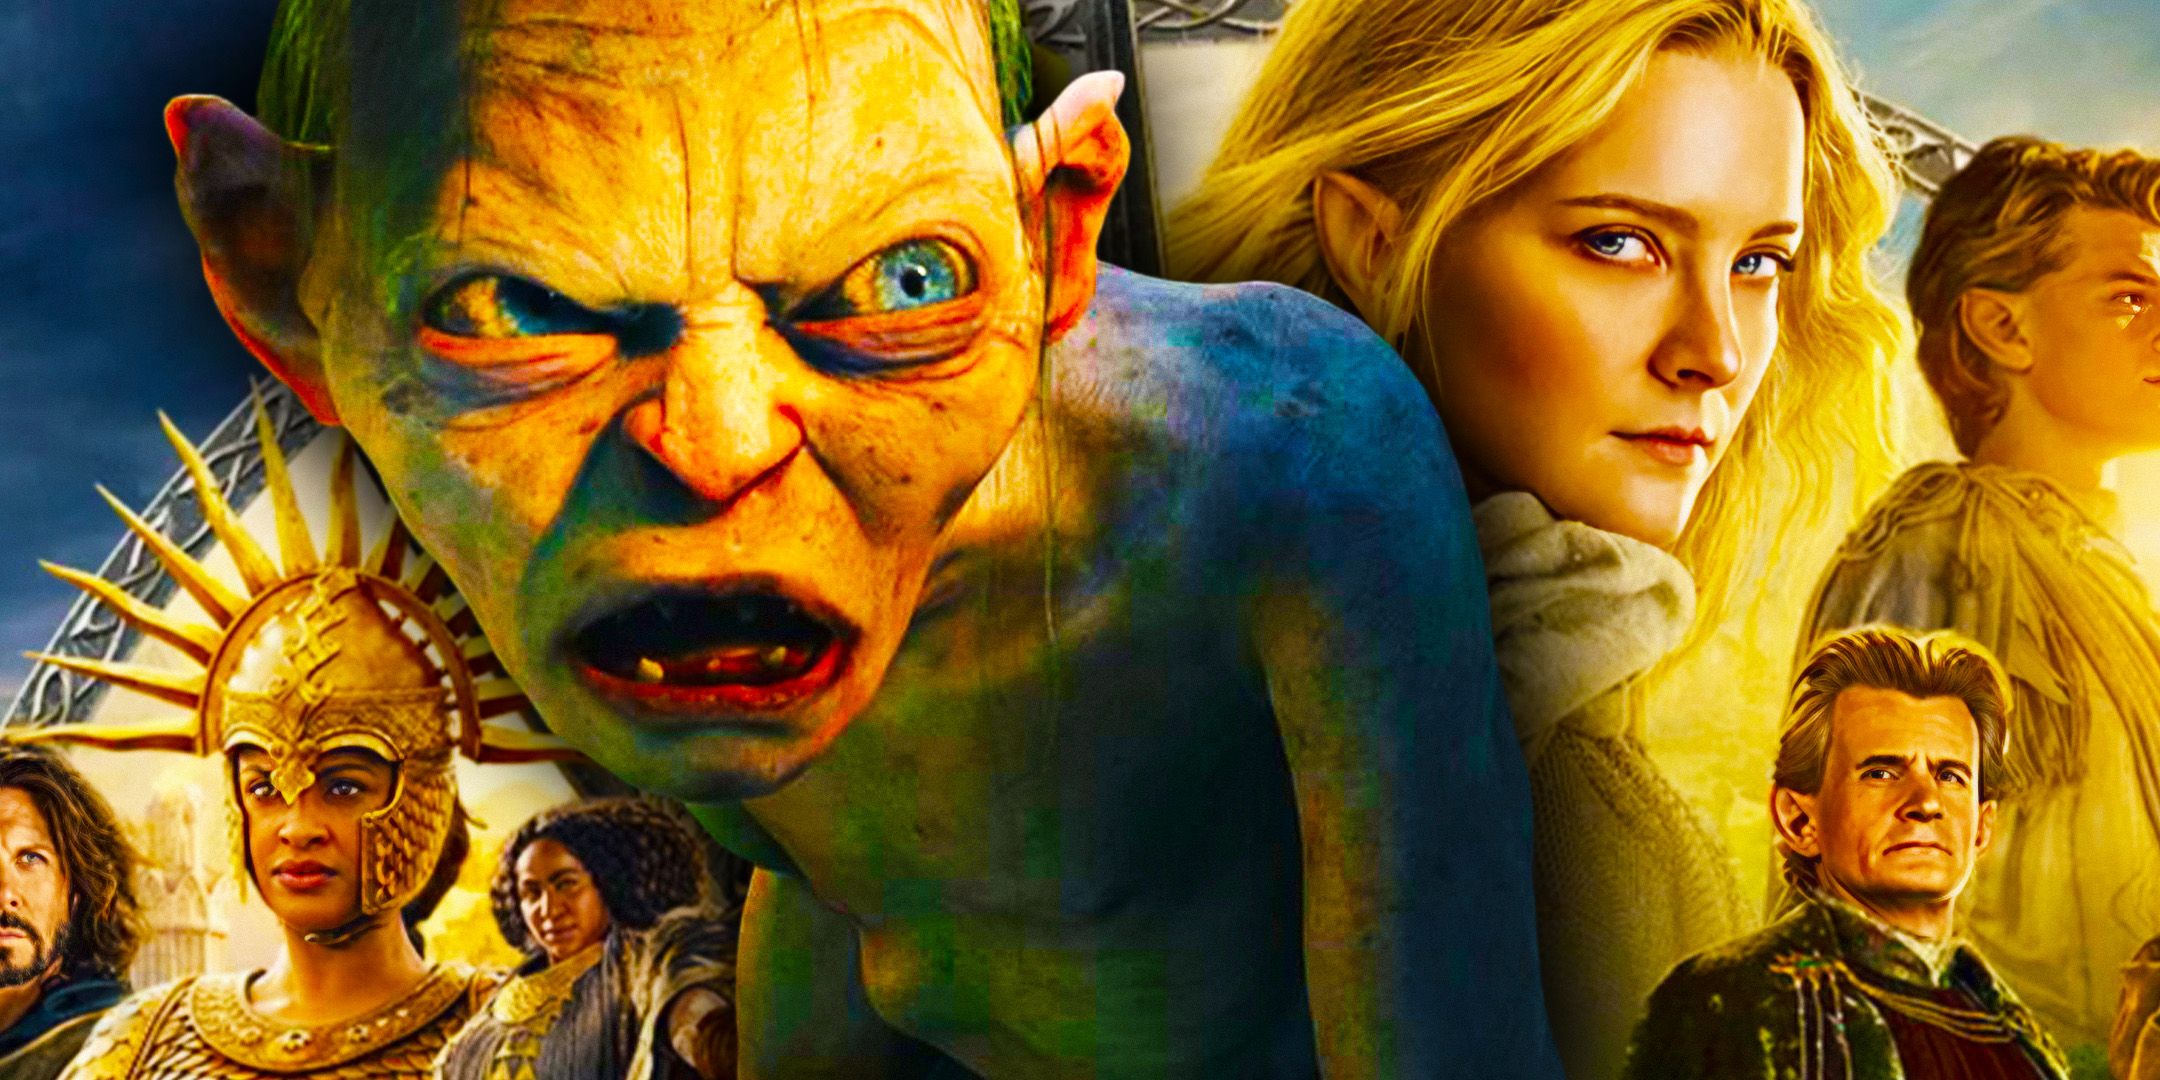 An image of Gollum from The Lord of the Rings over an image of The Rings of Power cast